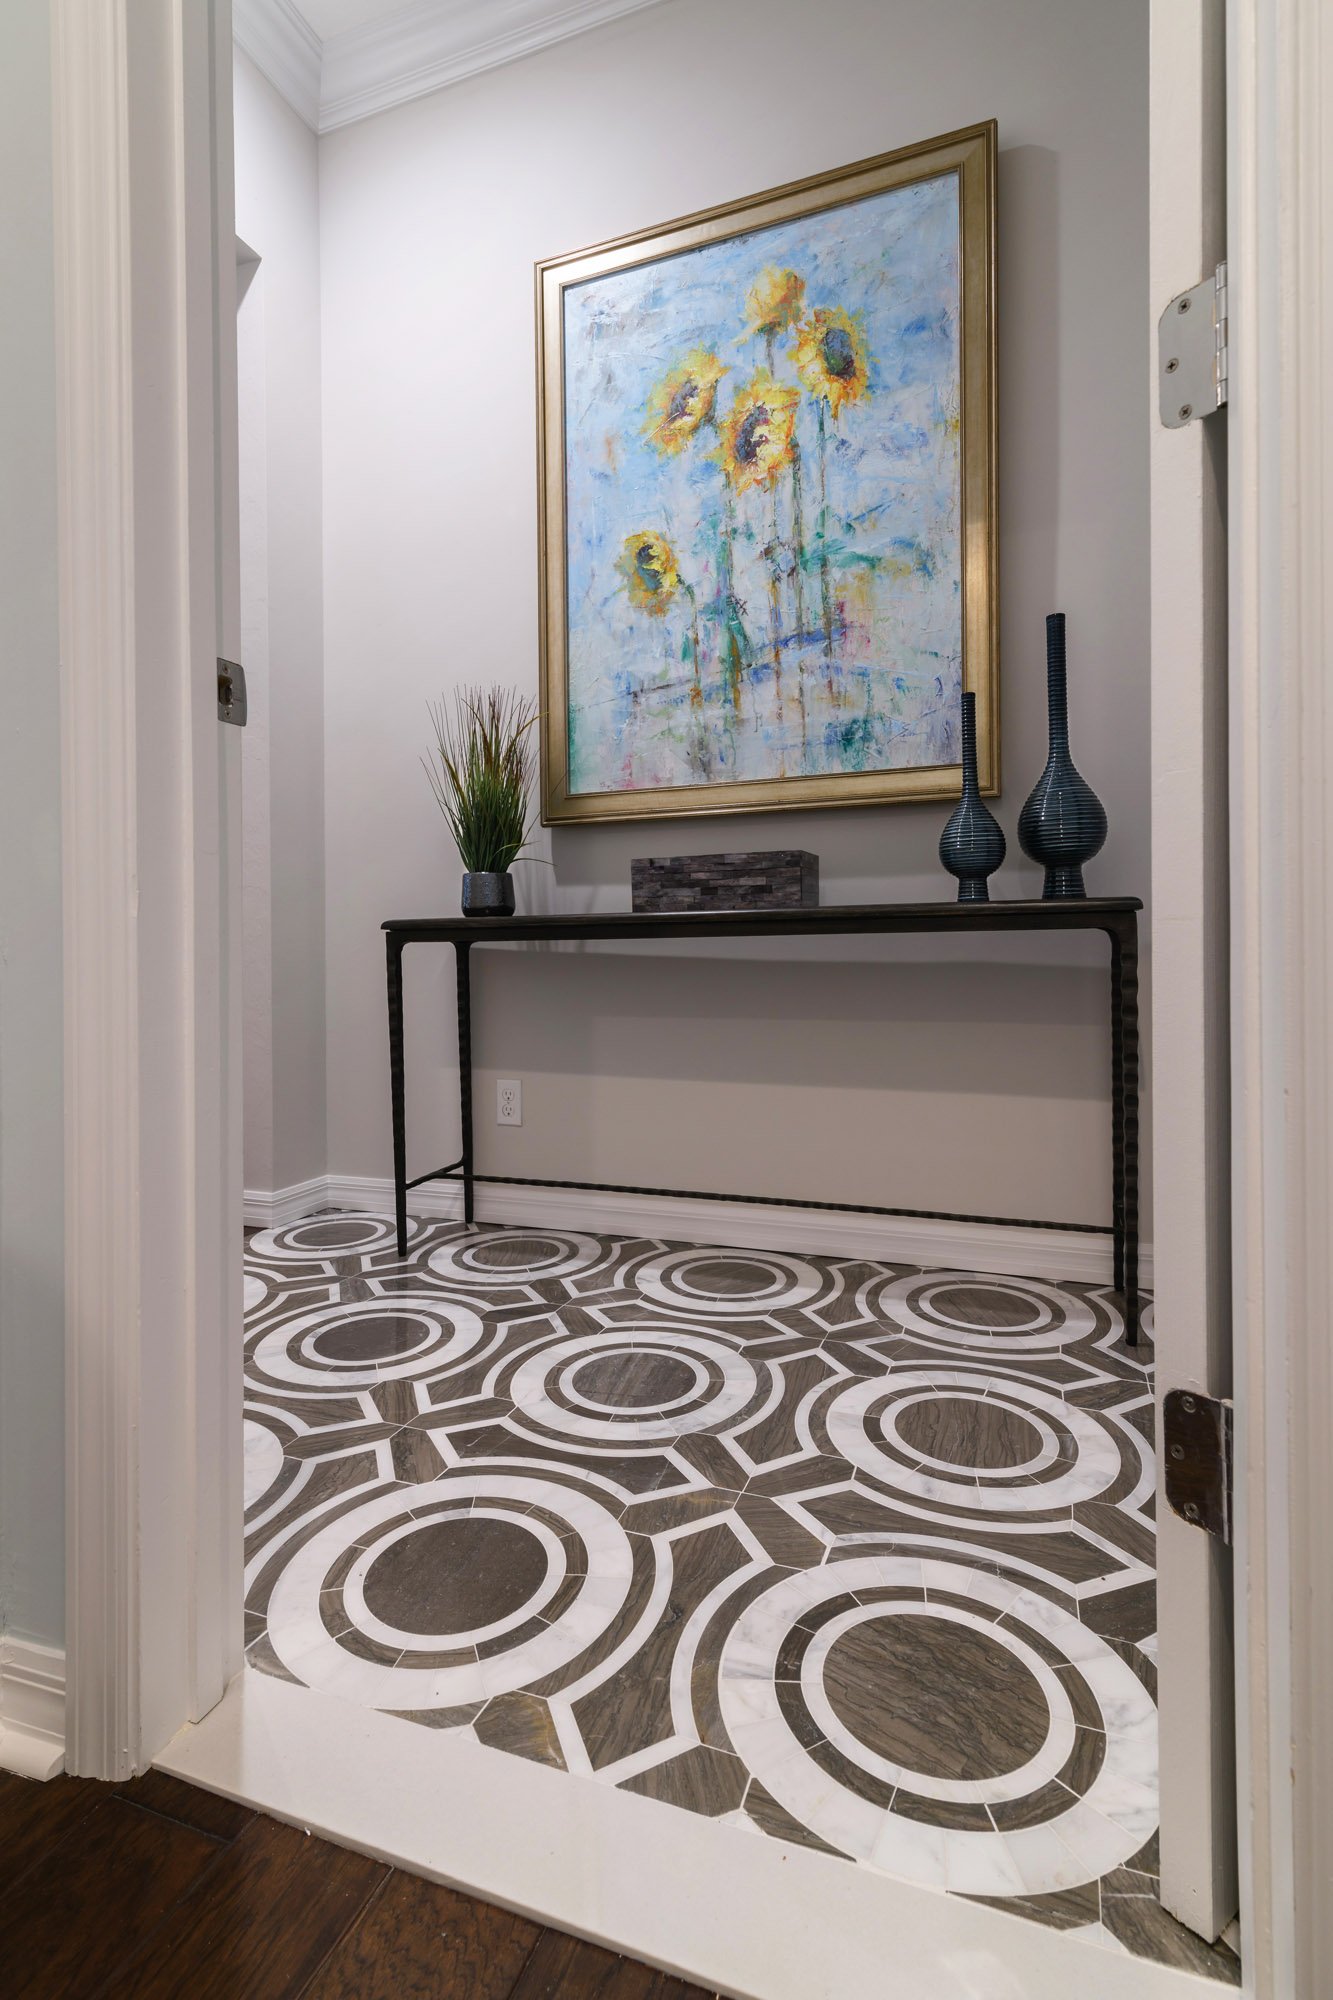 Wellington, Florida hallway with patterned tile design, console table, and sunflower oil painting.